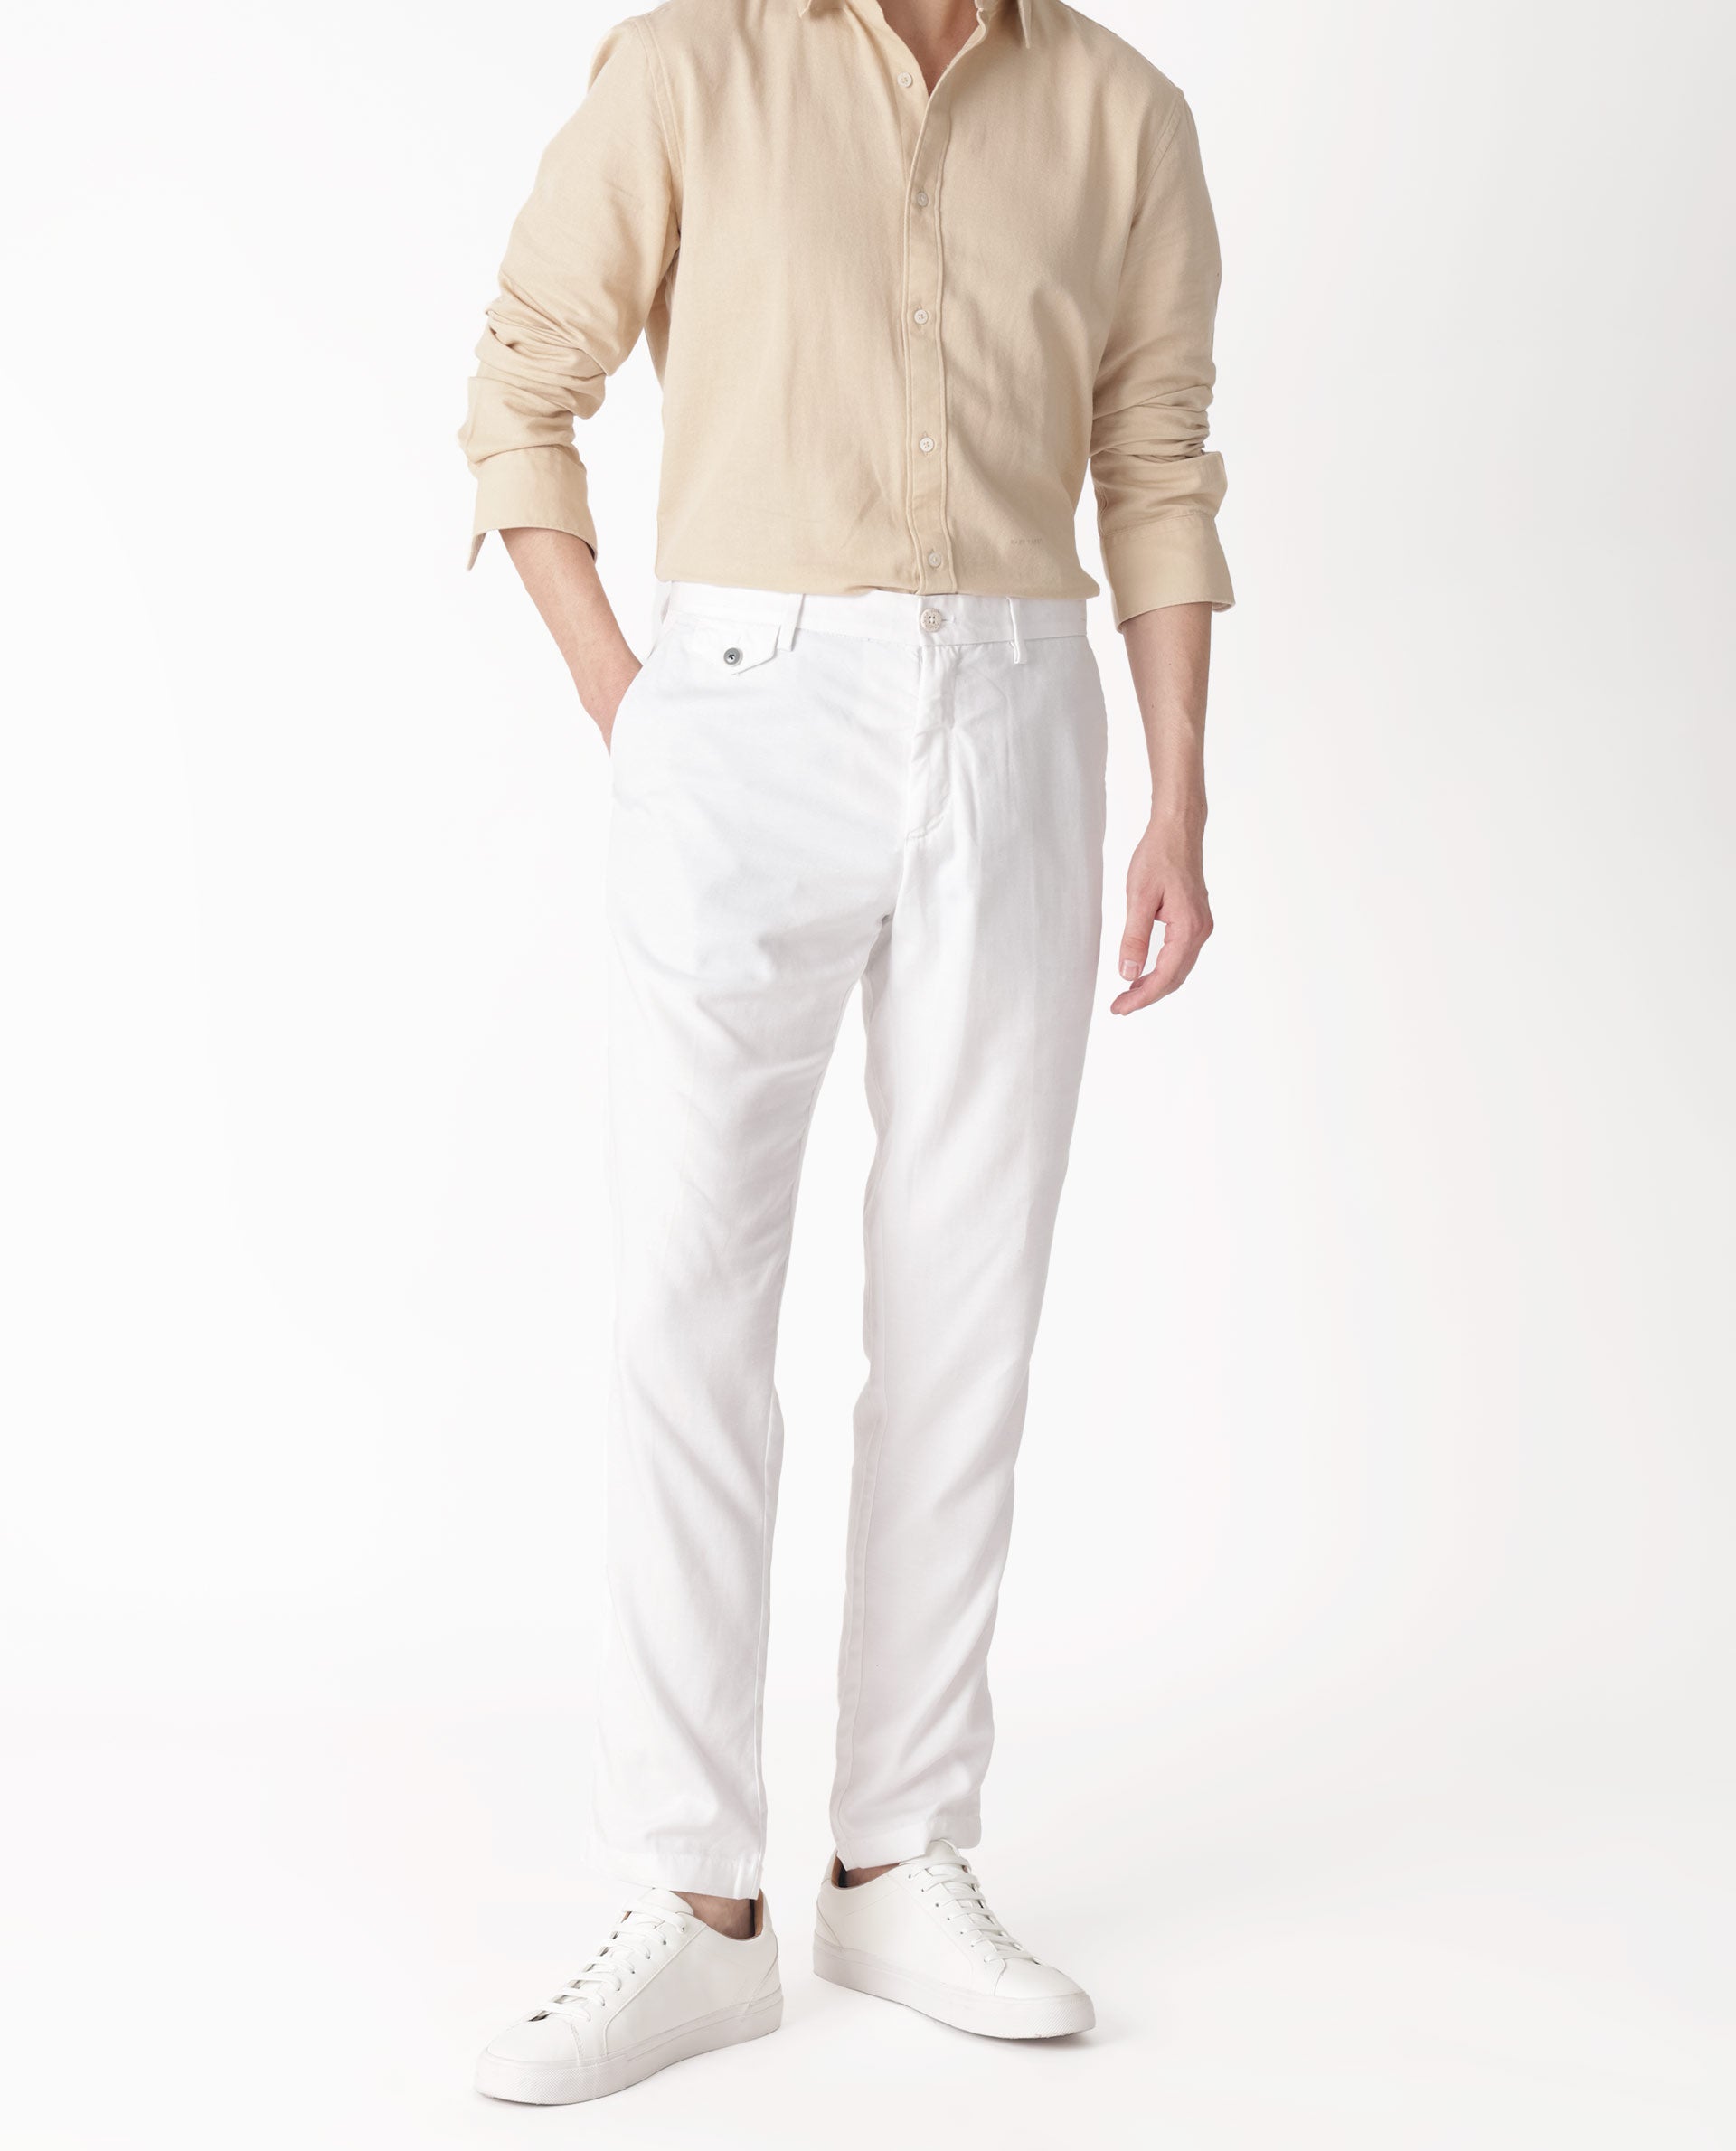 Buy Women White Regular Fit Solid Casual Trousers Online  733004  Allen  Solly